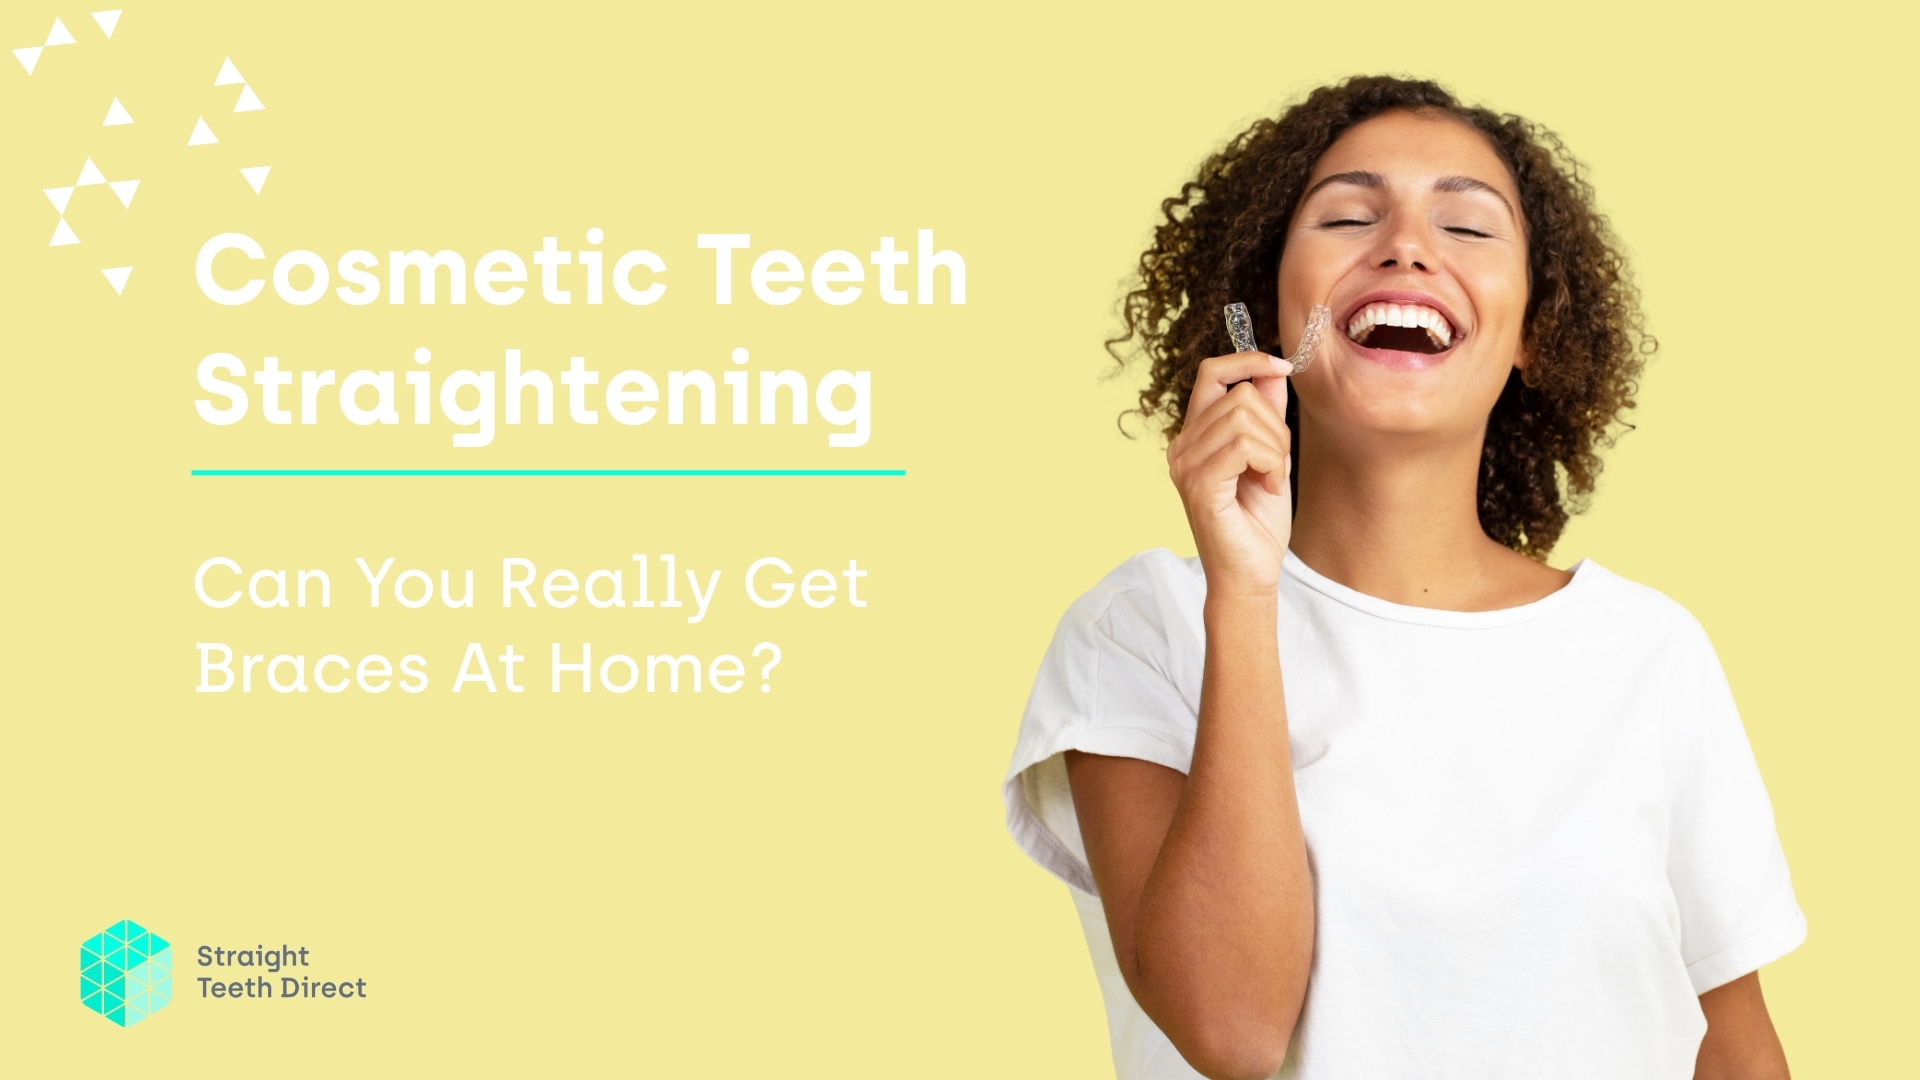 Cosmetic Teeth Straightening With Braces At Home